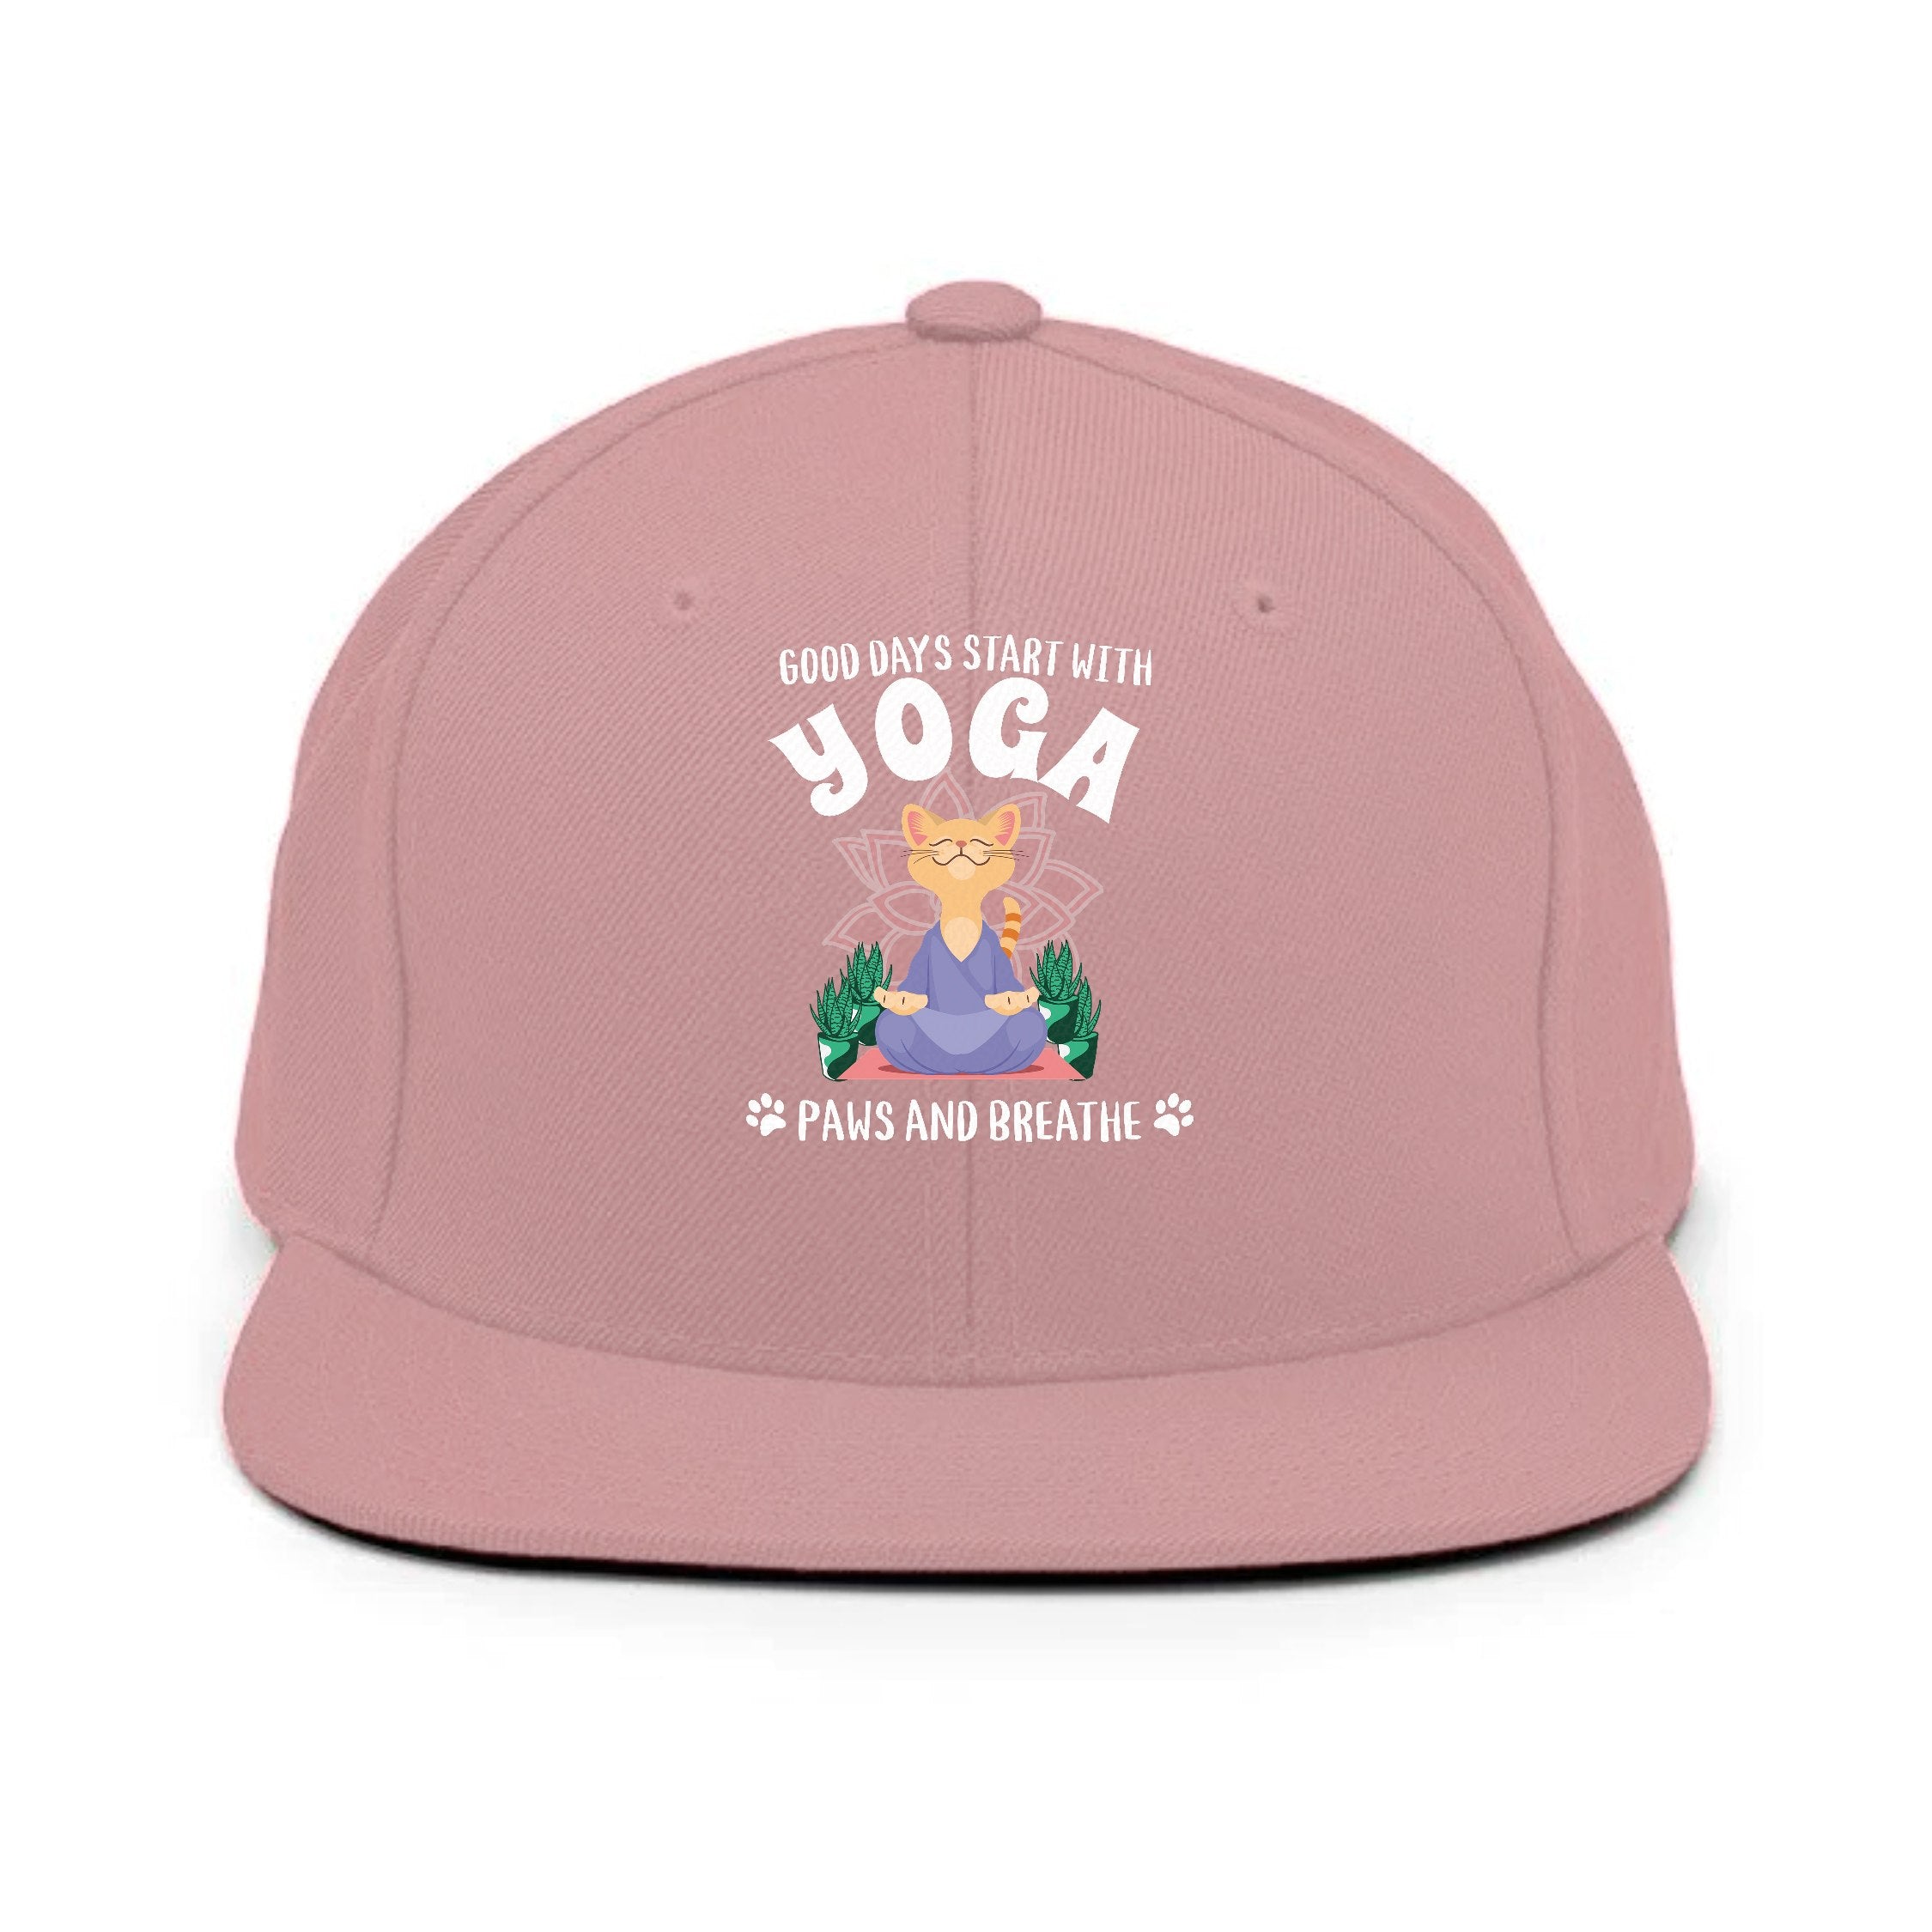 Good Days Start With Yoga, Paws And Breath – Pandaize